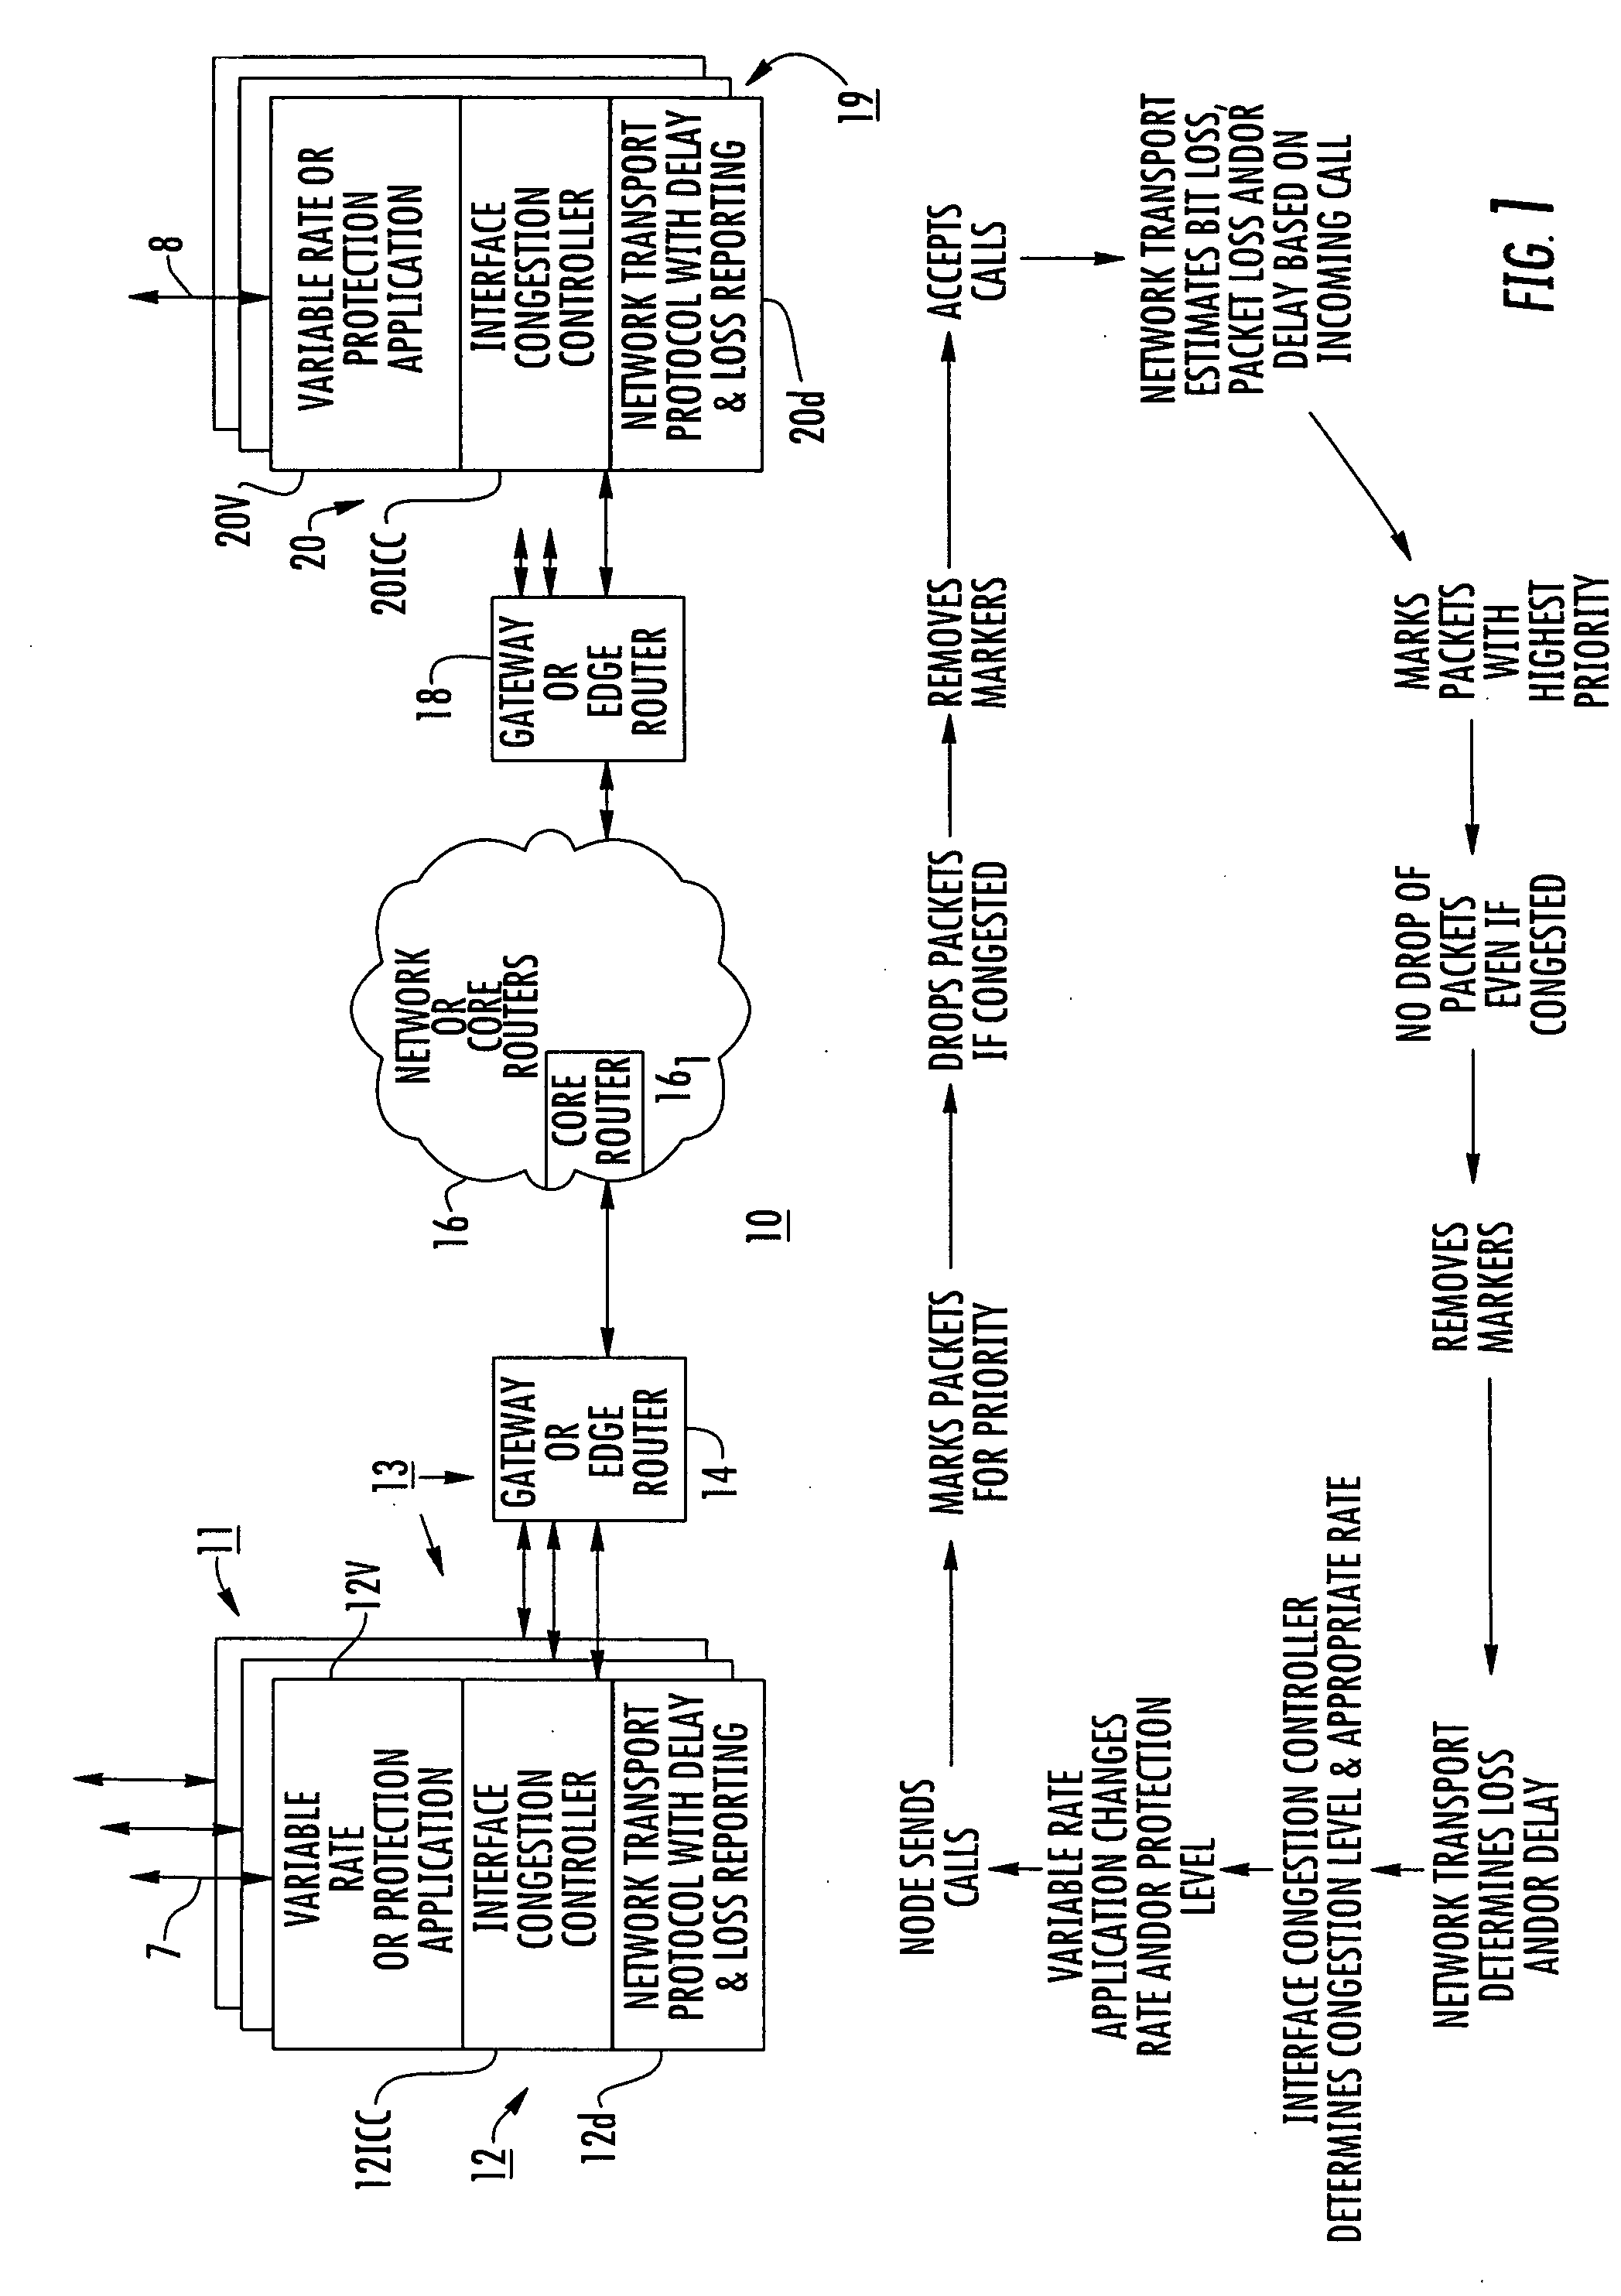 Adaptive application sensitive rate control system for packetized networks